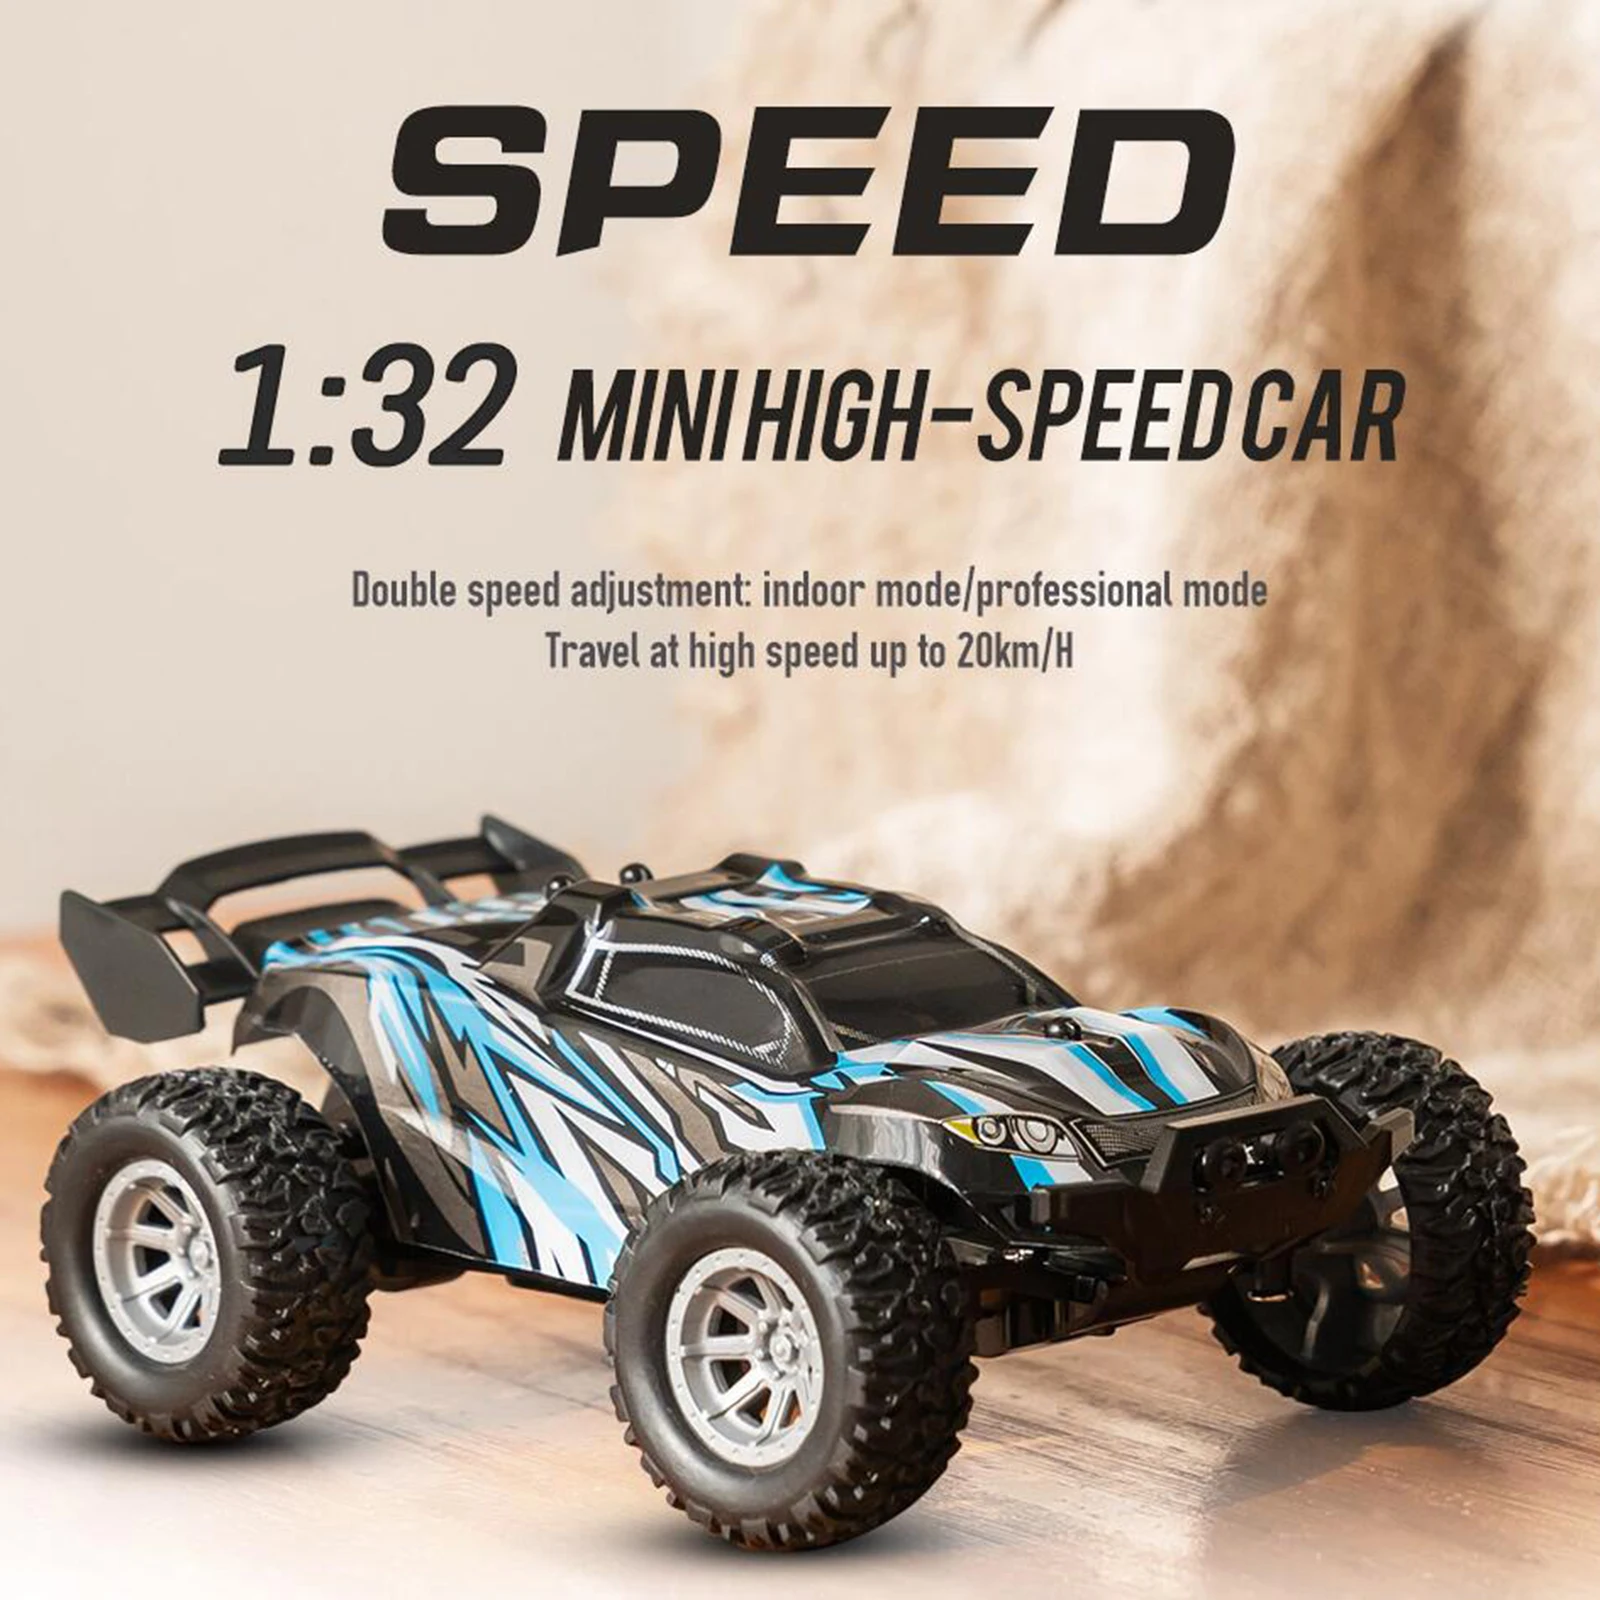 1pc S658 1/32 RC Car 2.4GHz 20km/h 2WD High Speed  Car Off-Road Truck